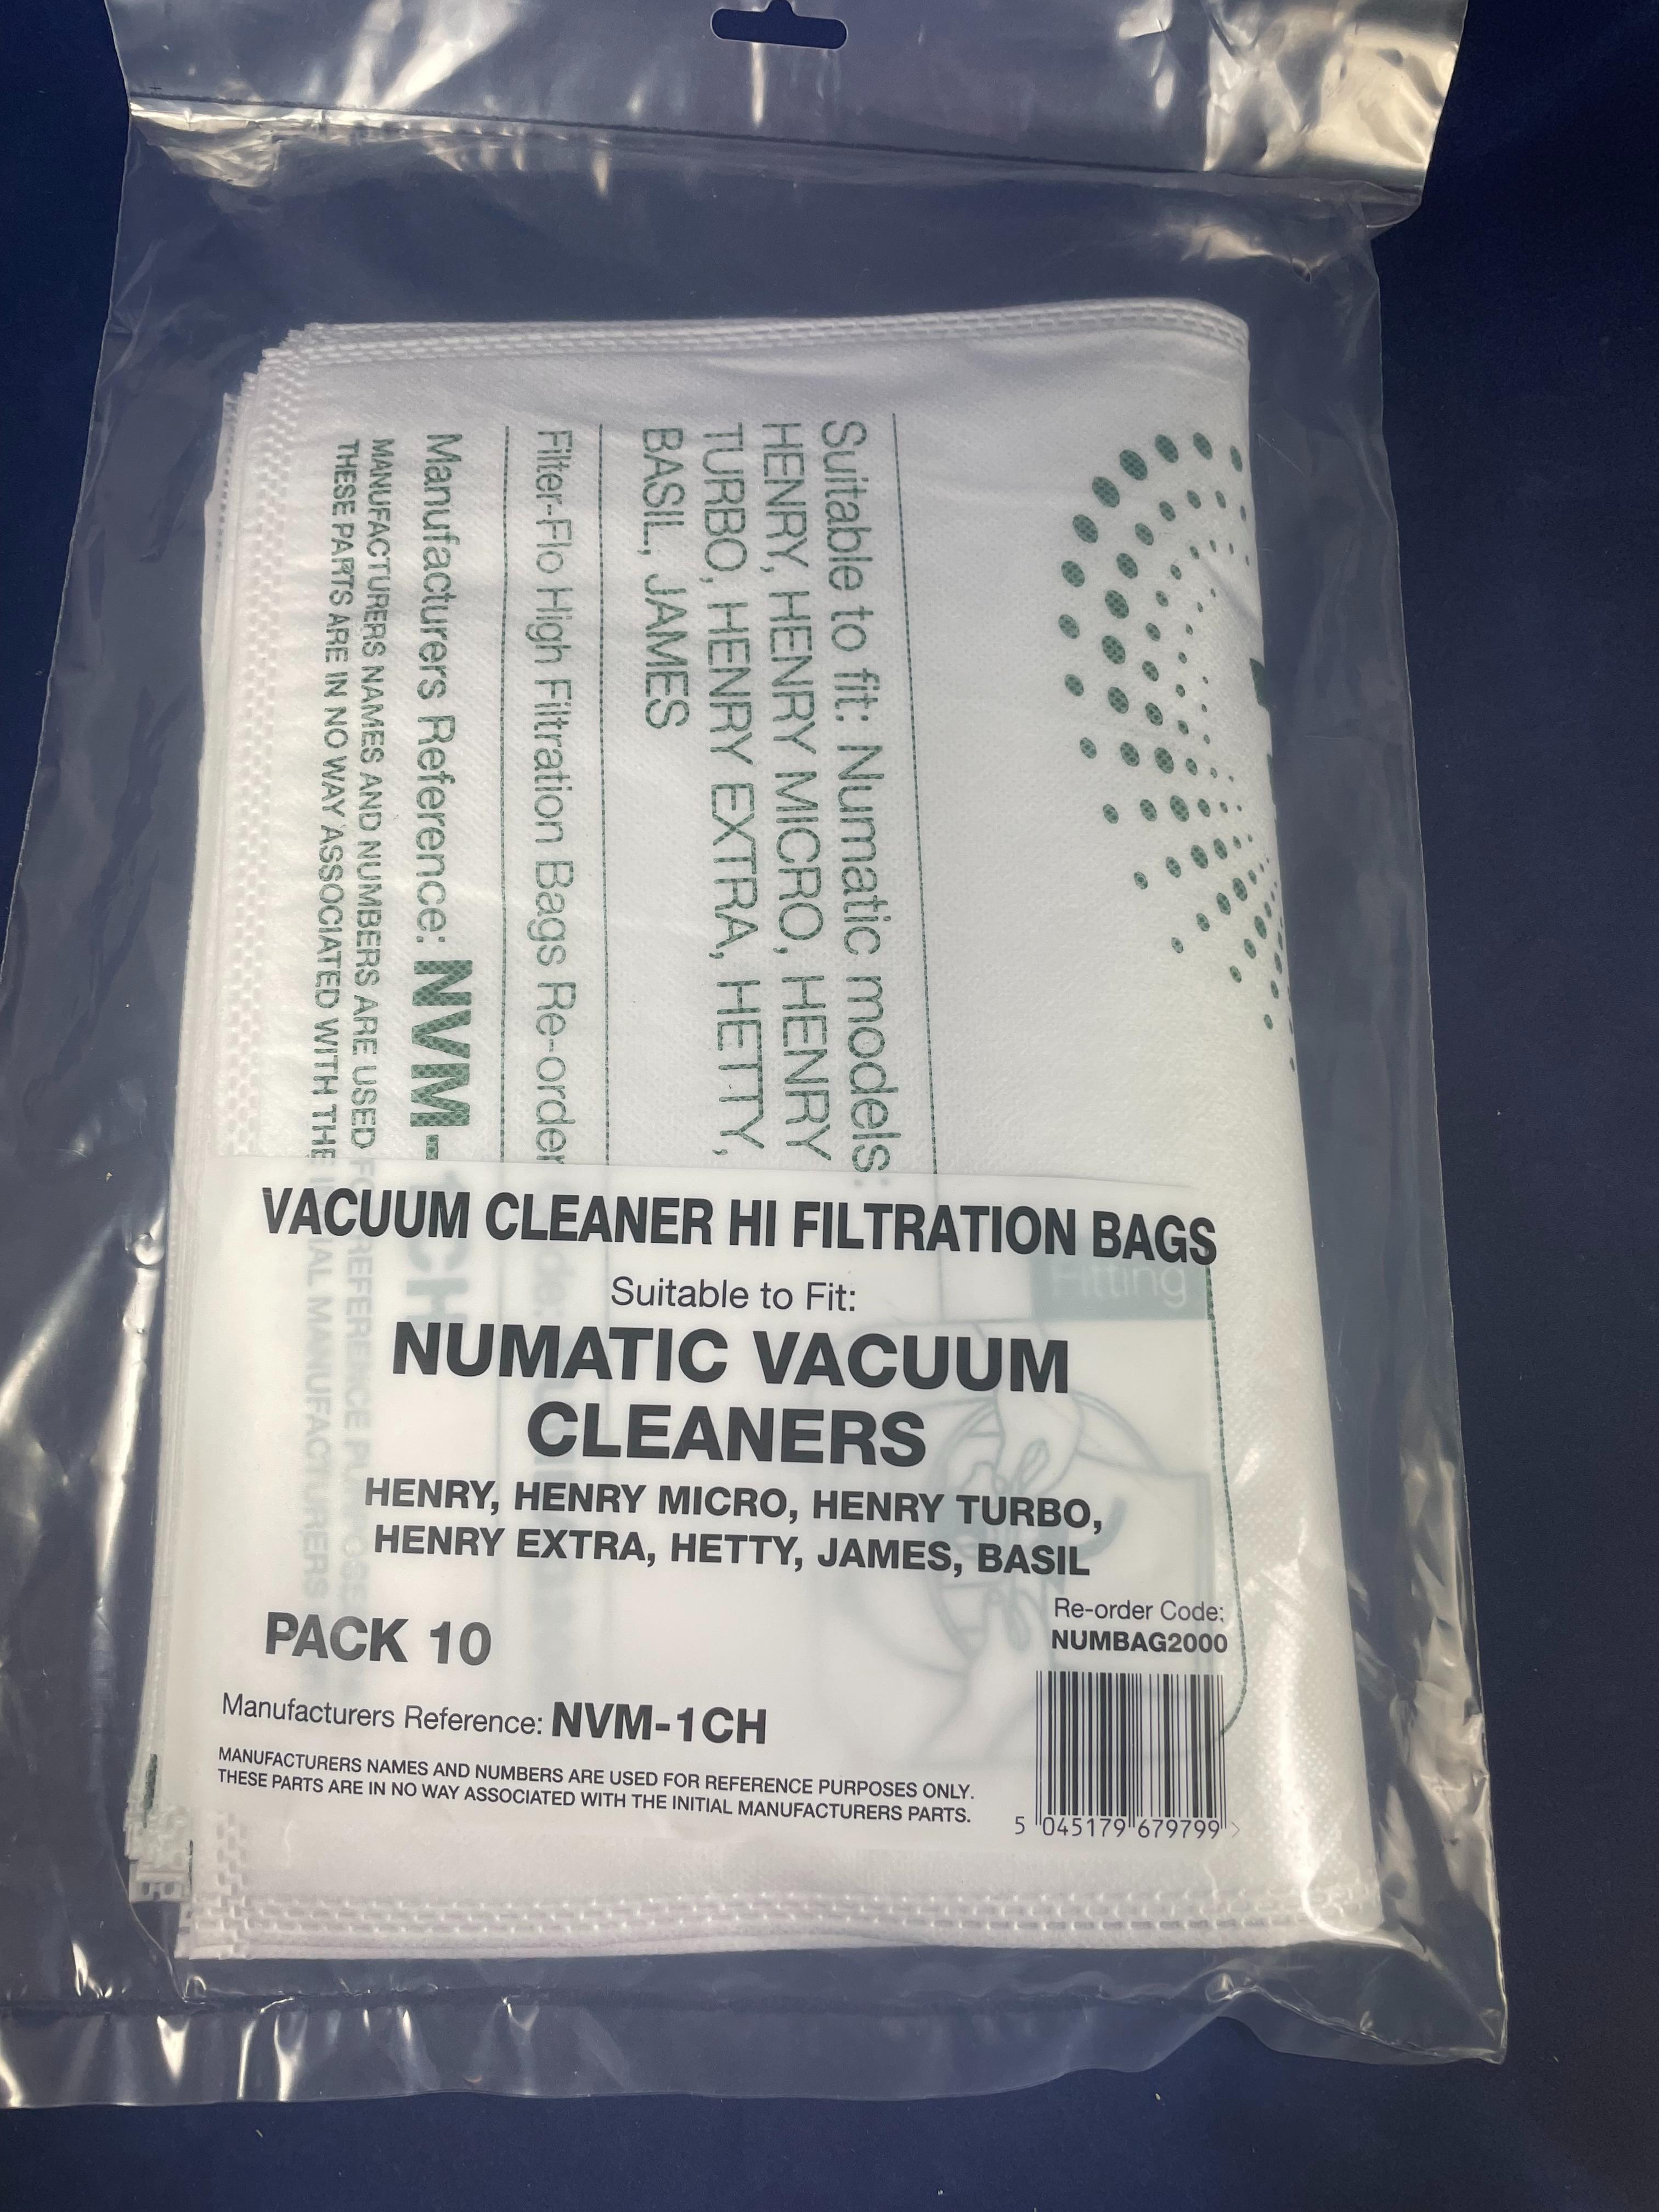 James (Numatic) Filter-Flo Synthetic Dust Bags (Pack Of 10) - Pattern Part